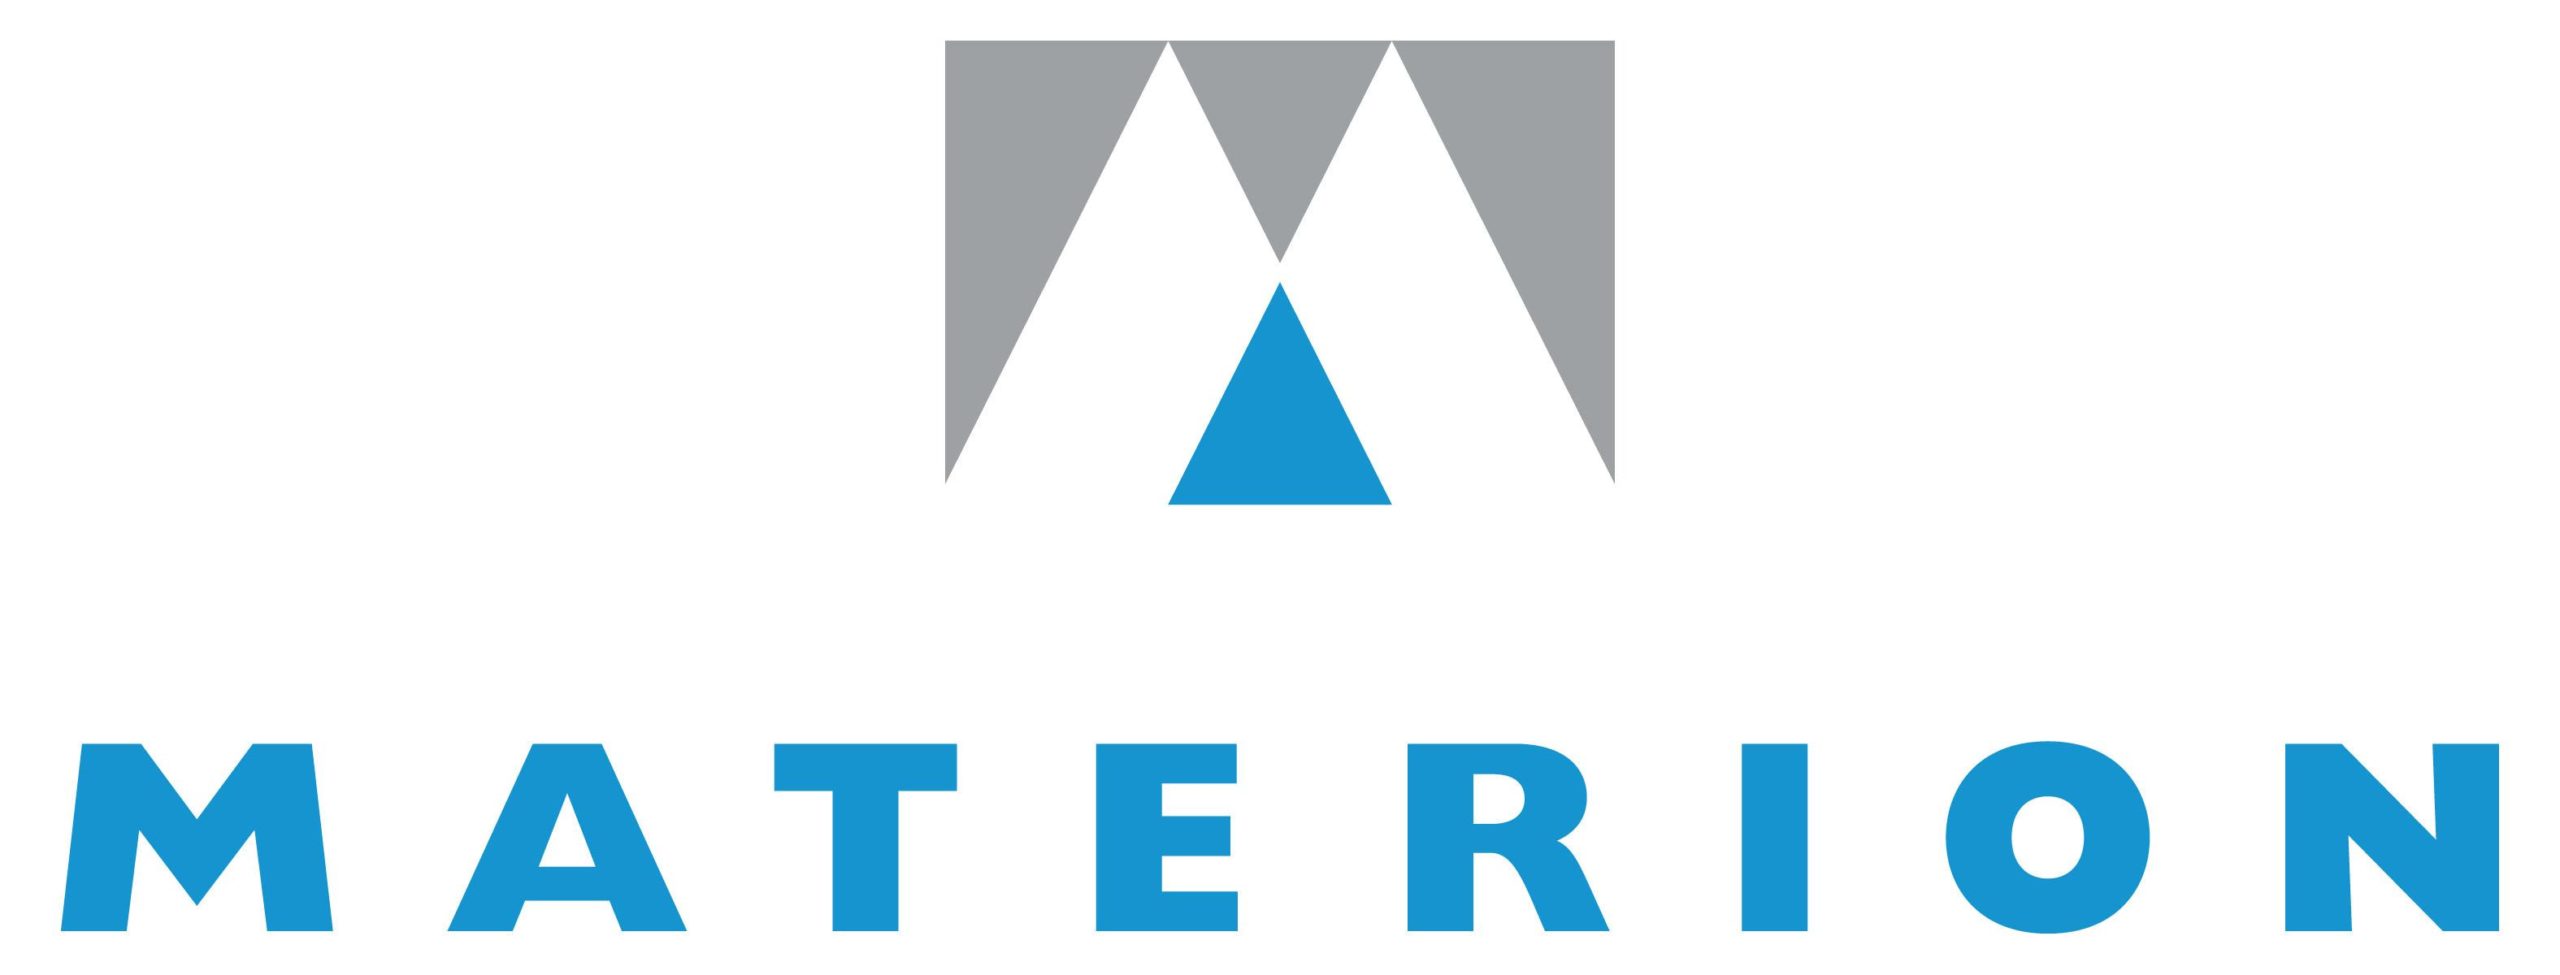 Materion Logo scaled